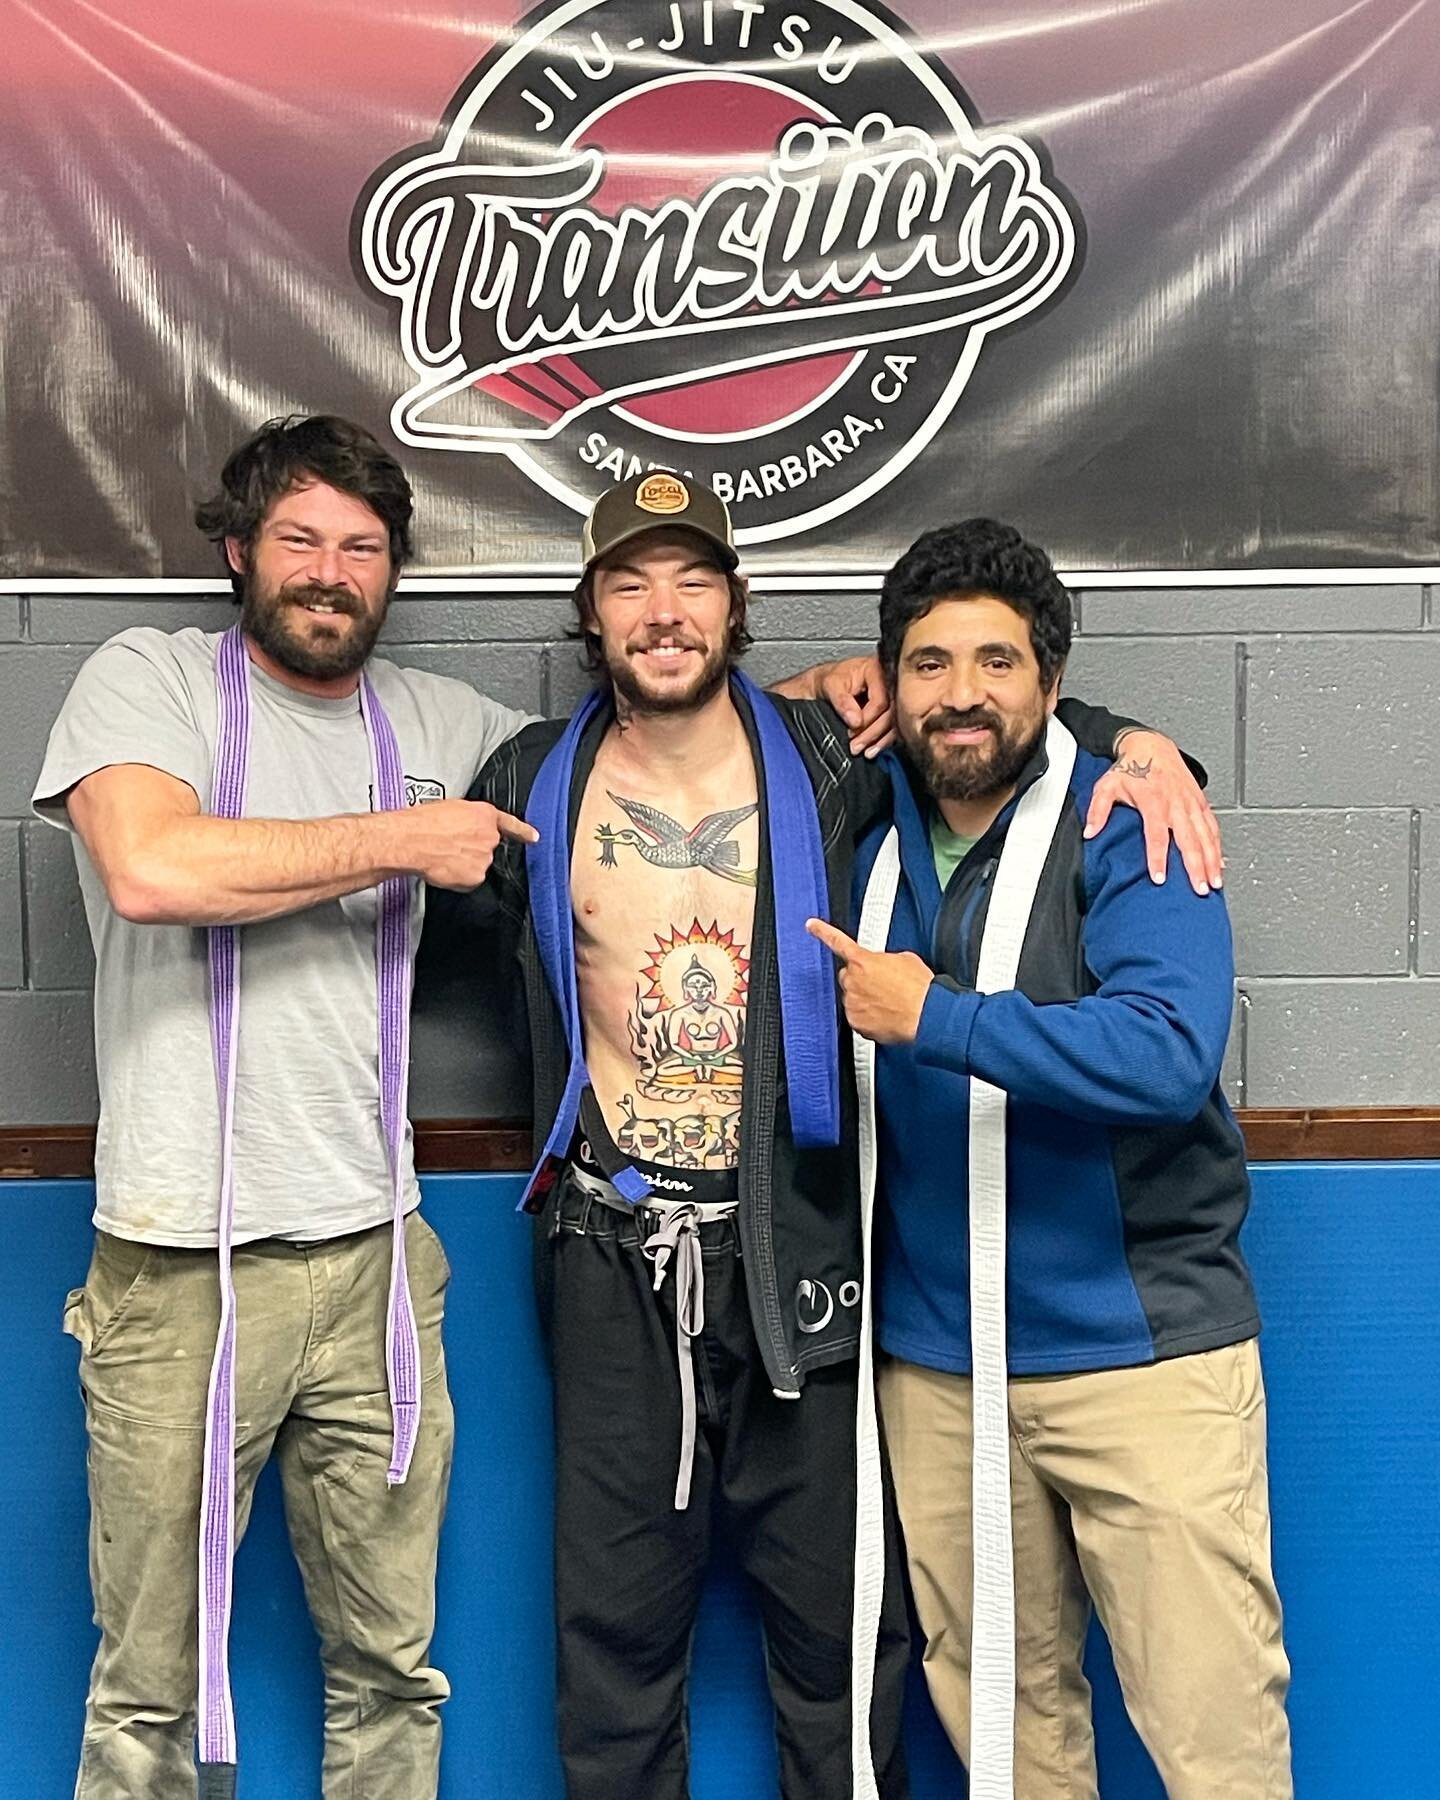 We are so proud of @cjayribley who was promoted to a Brazilian Jiu-Jitsu blue belt over the weekend! Cjay is an all around bad-ass on the mats and in our shop, and it&rsquo;s a pleasure watching him conquer his dreams. #brazilianjiujitsu #jiujitsu #b